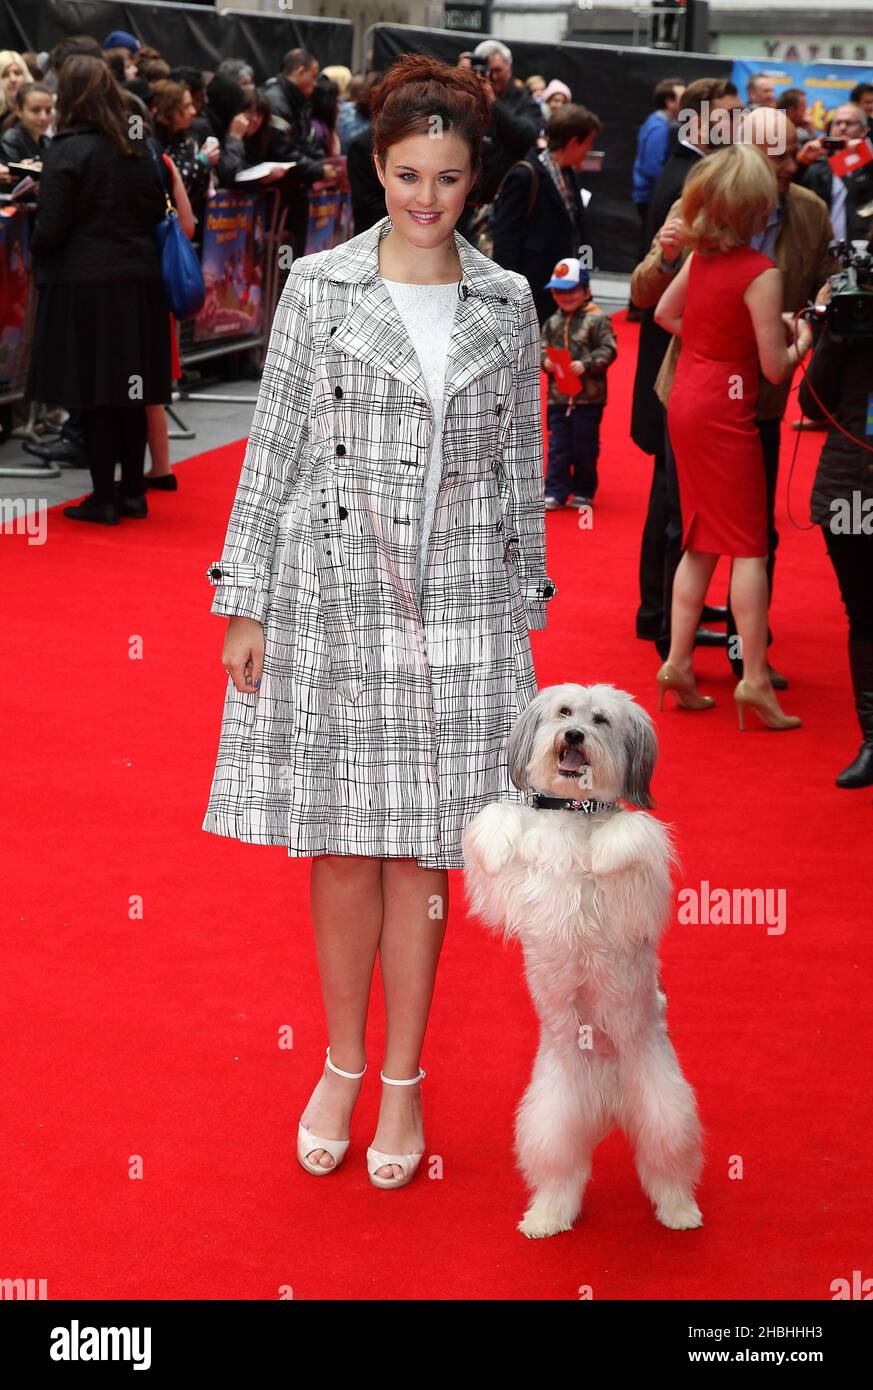 Ashleigh and Pudsey attending the Postman Pat The Movie World Premier at The West End Odeon in Leicester Square in London. Stock Photo